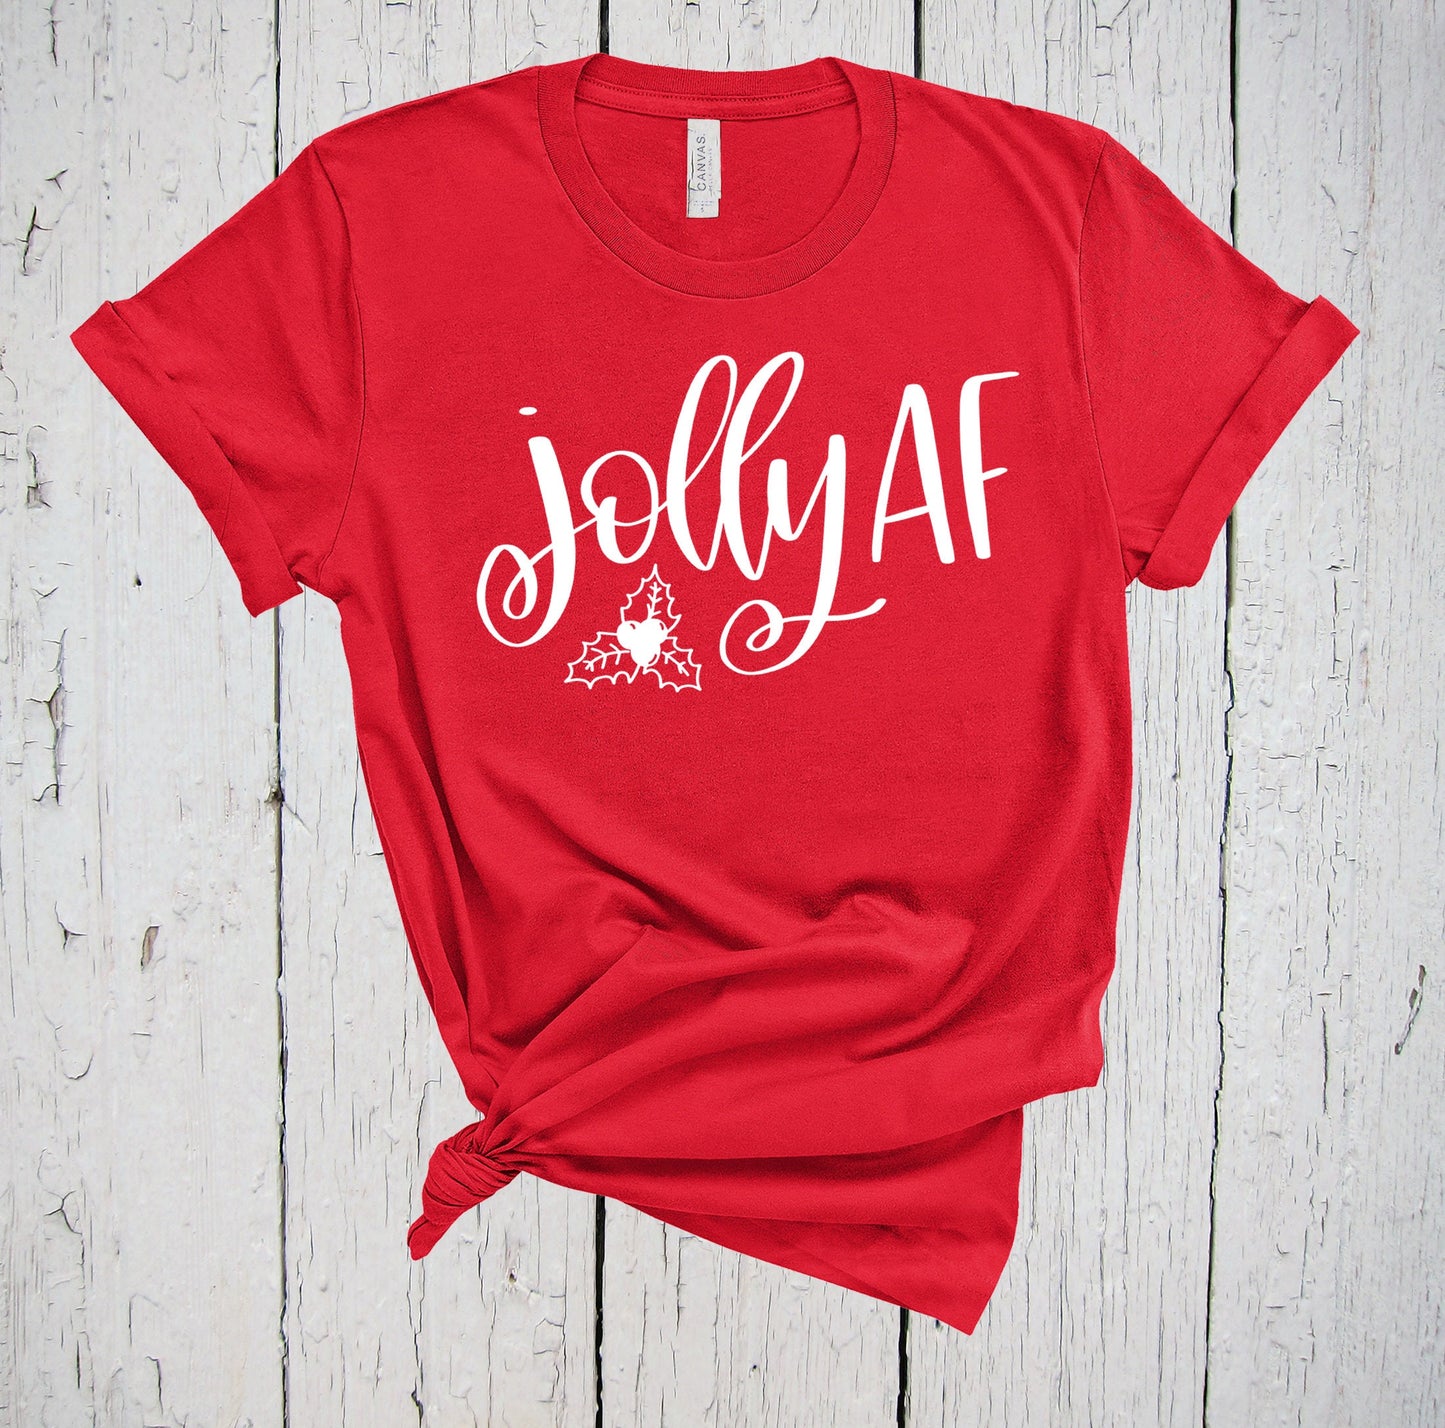 Jolly AF, Winter Shirt, Sarcastic Ugly Christmas T-Shirt, Cute Festive Holly Graphic Tee, Office Party Outfit, Matching Family Xmas Tops